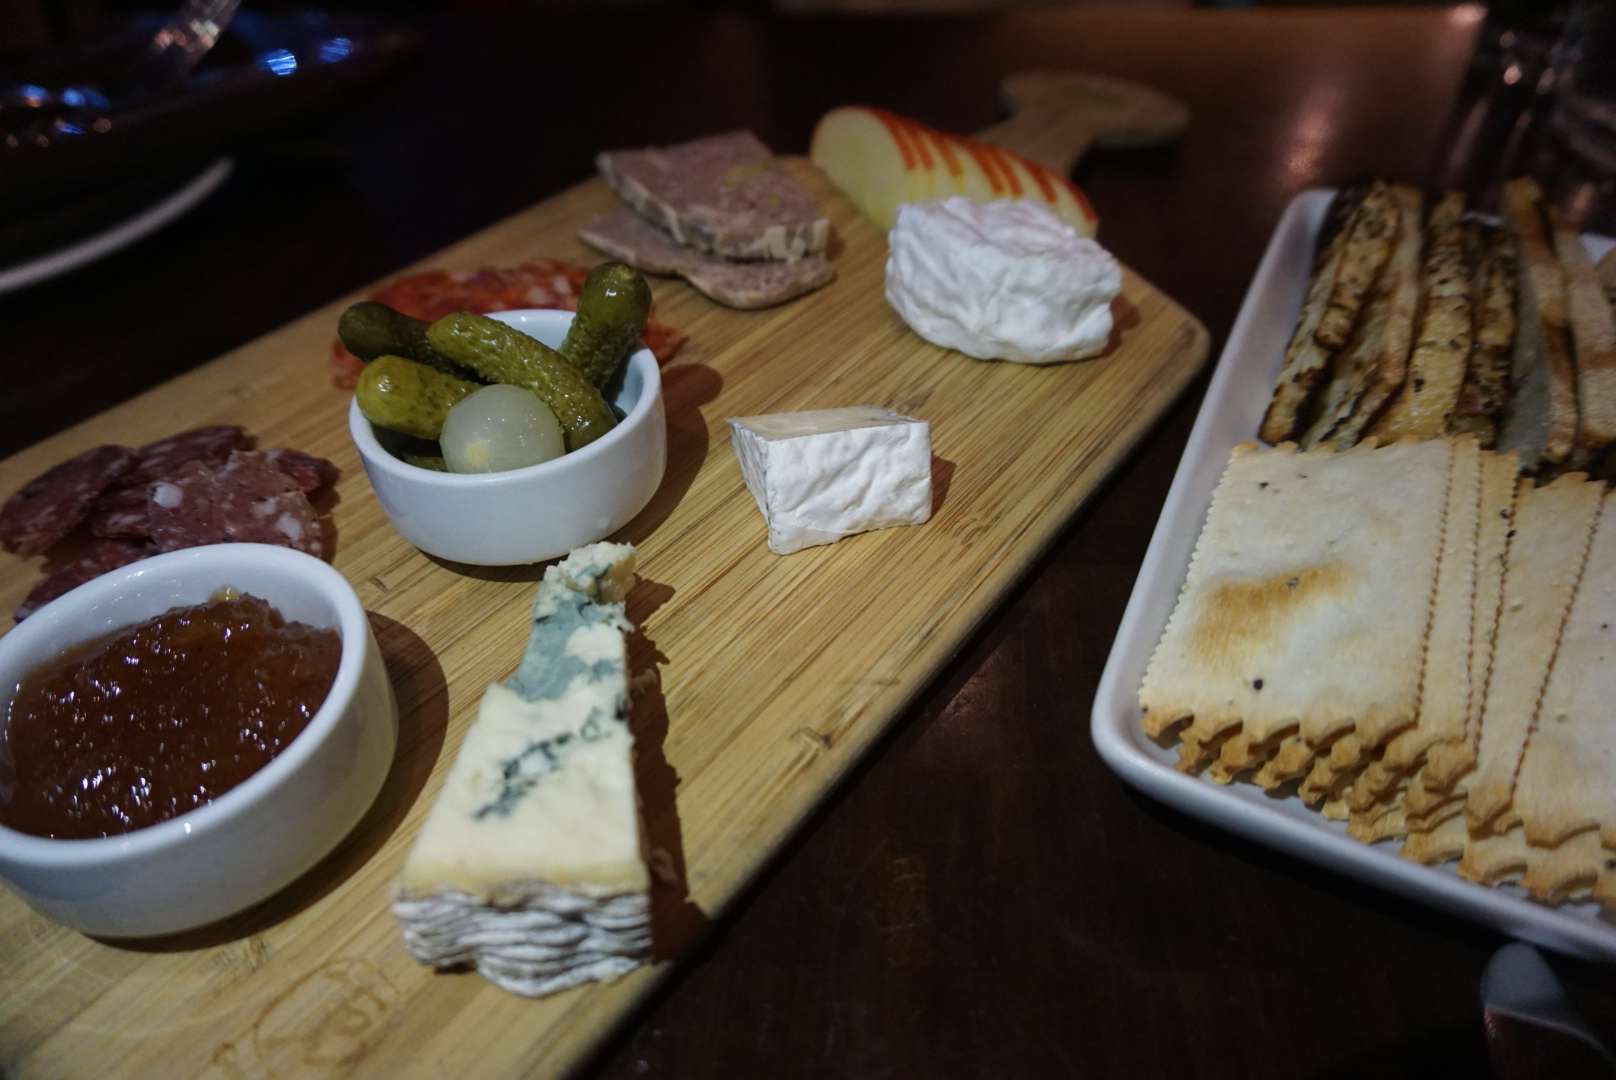 The charcuterie plate!